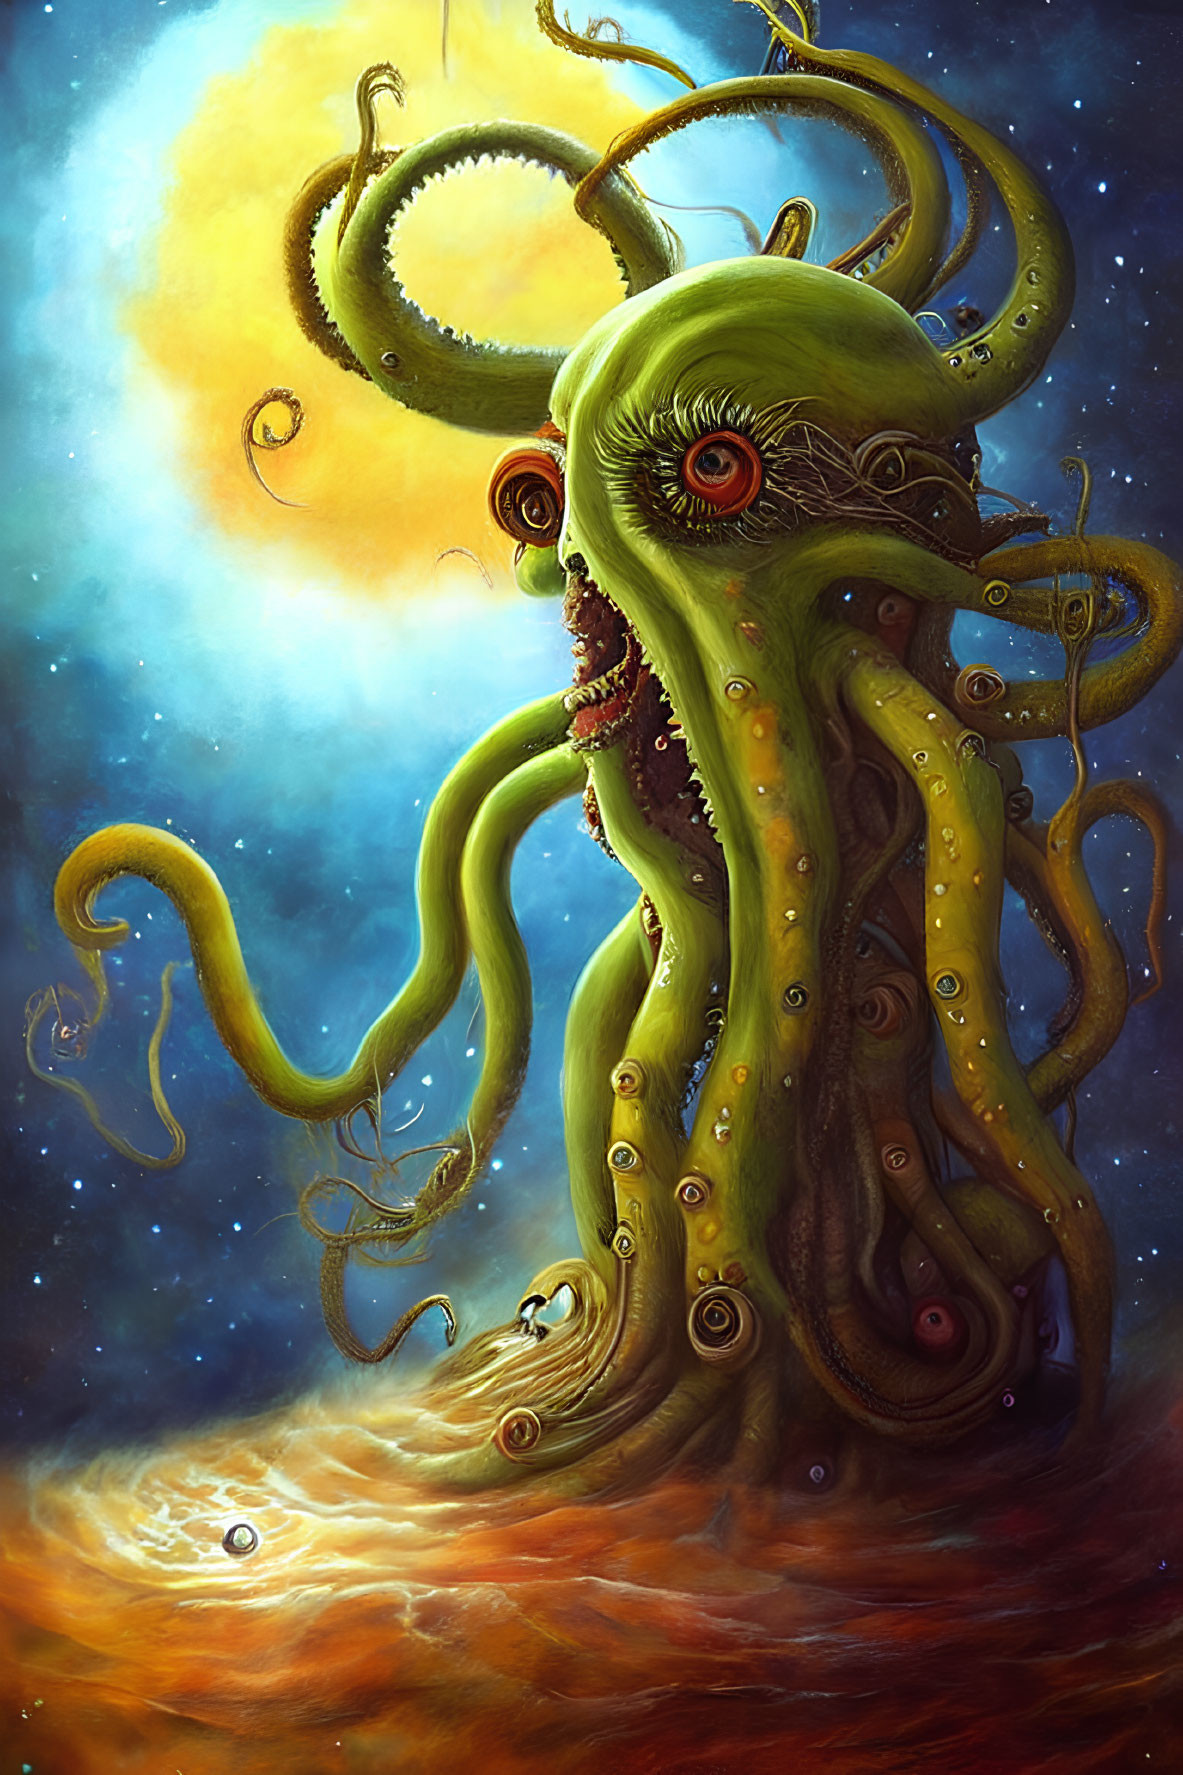 Colorful alien creature with tentacles and multiple eyes in cosmic setting